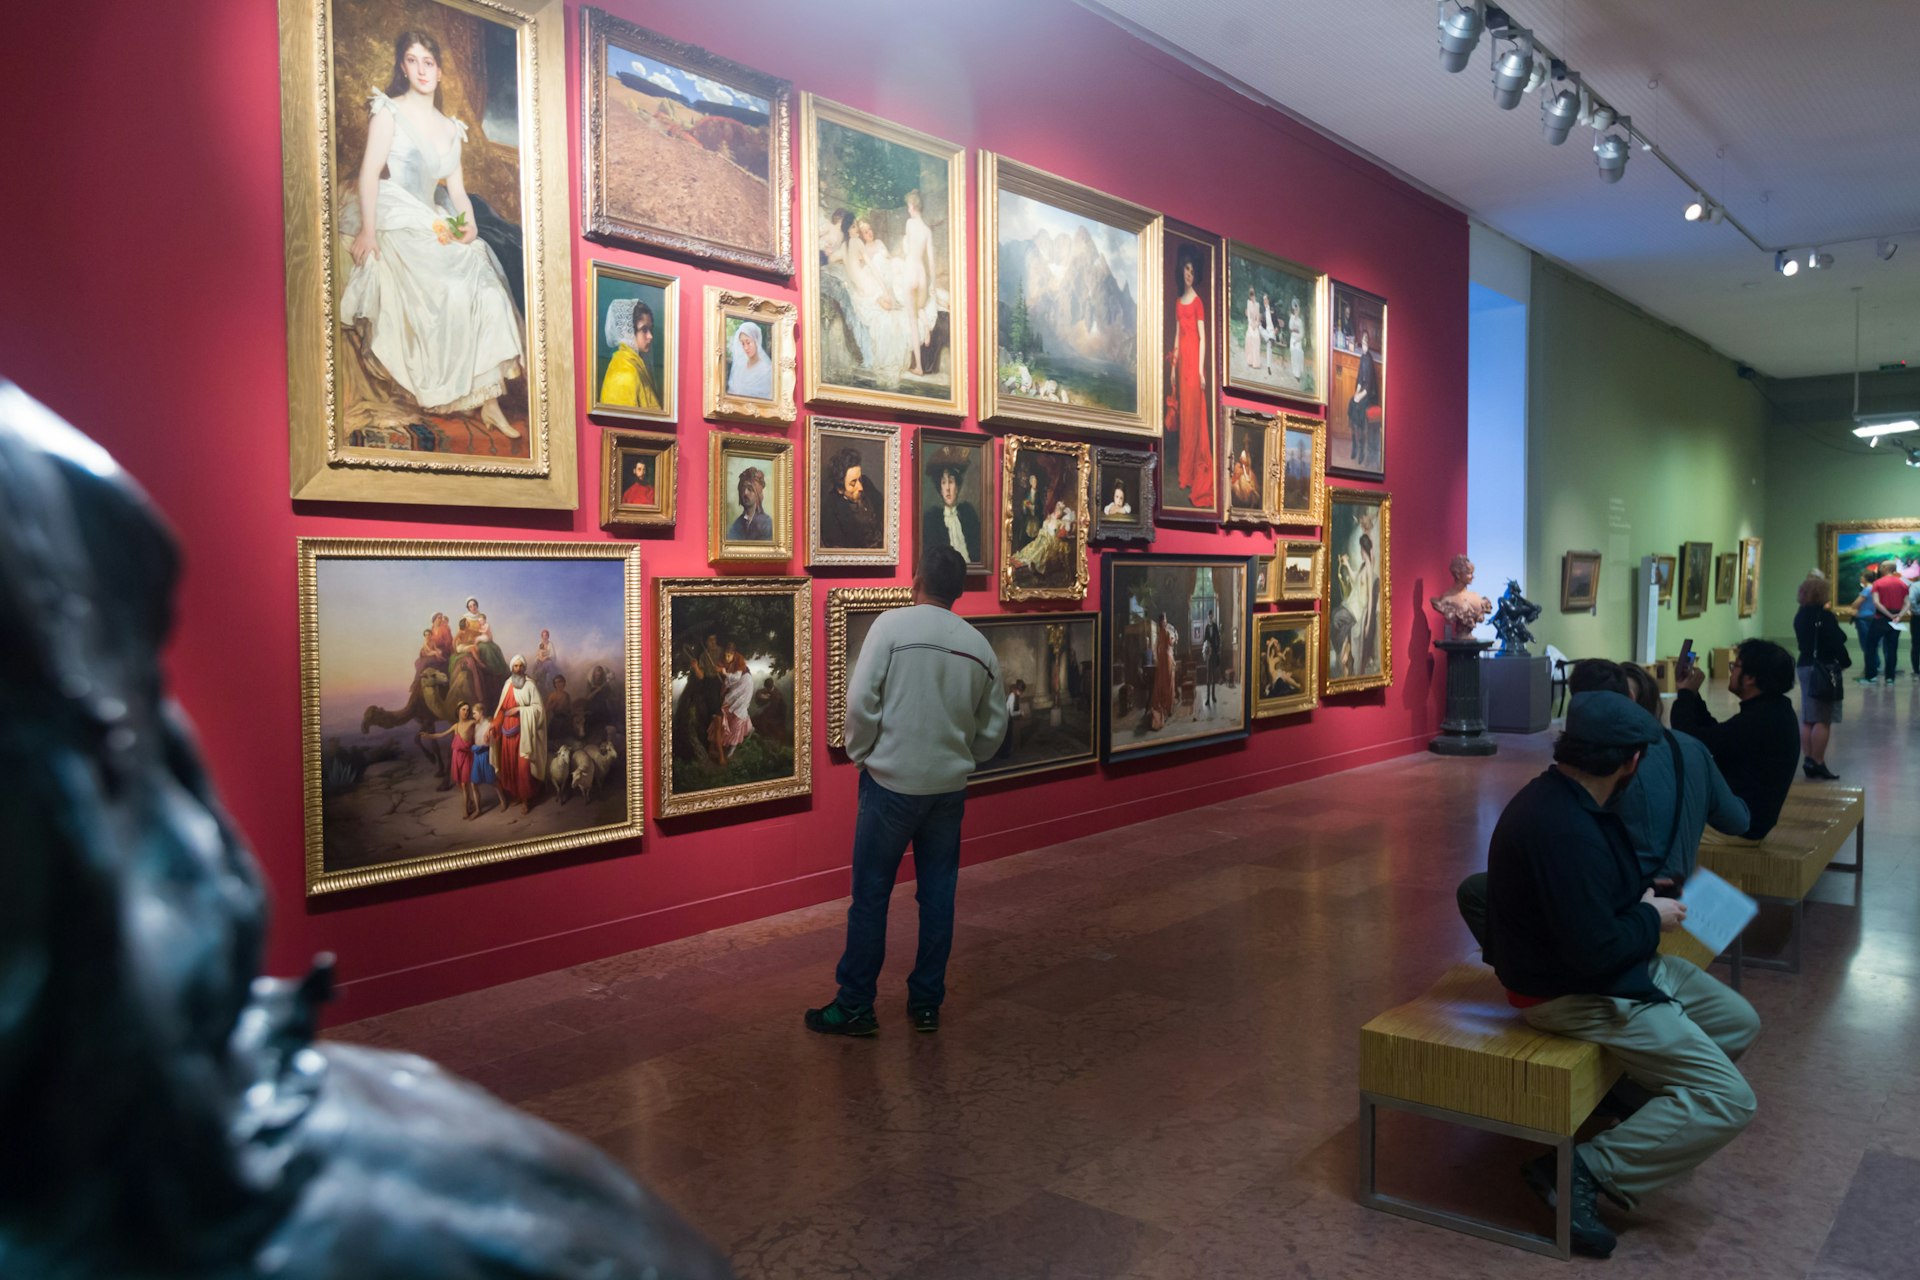 Visitors look at paintings on walls at the Hungarian National Gallery in Buda Castle, Budapest